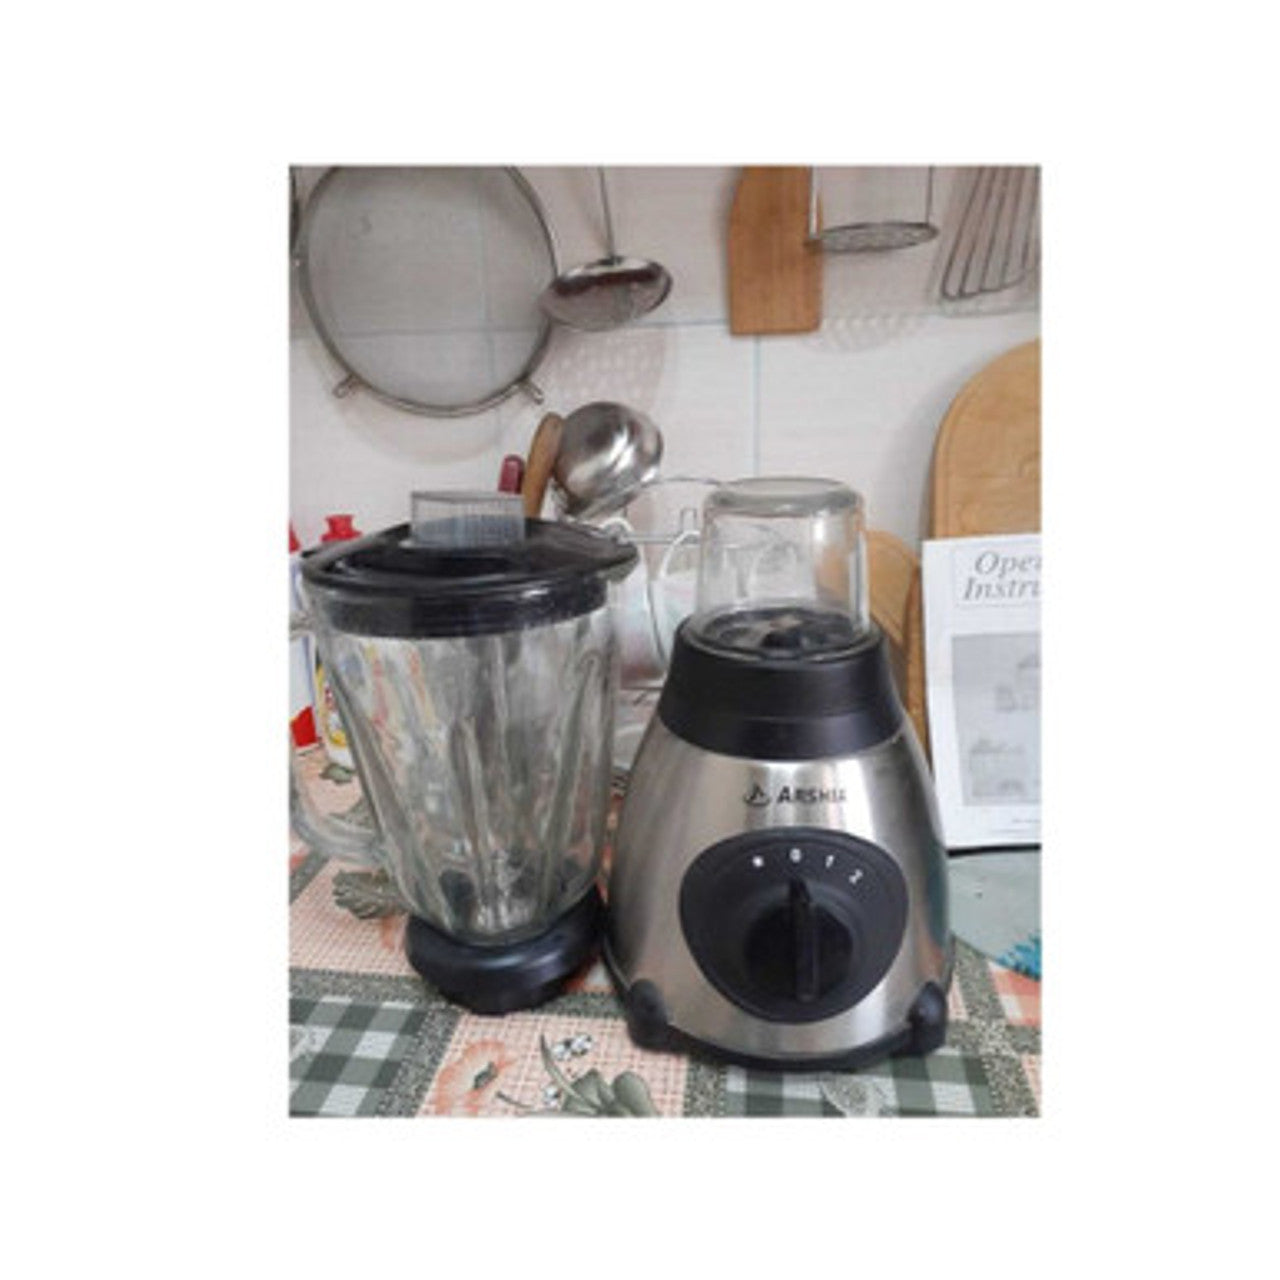 Arshia 2 in 1 Blender with coffee grinder Silver